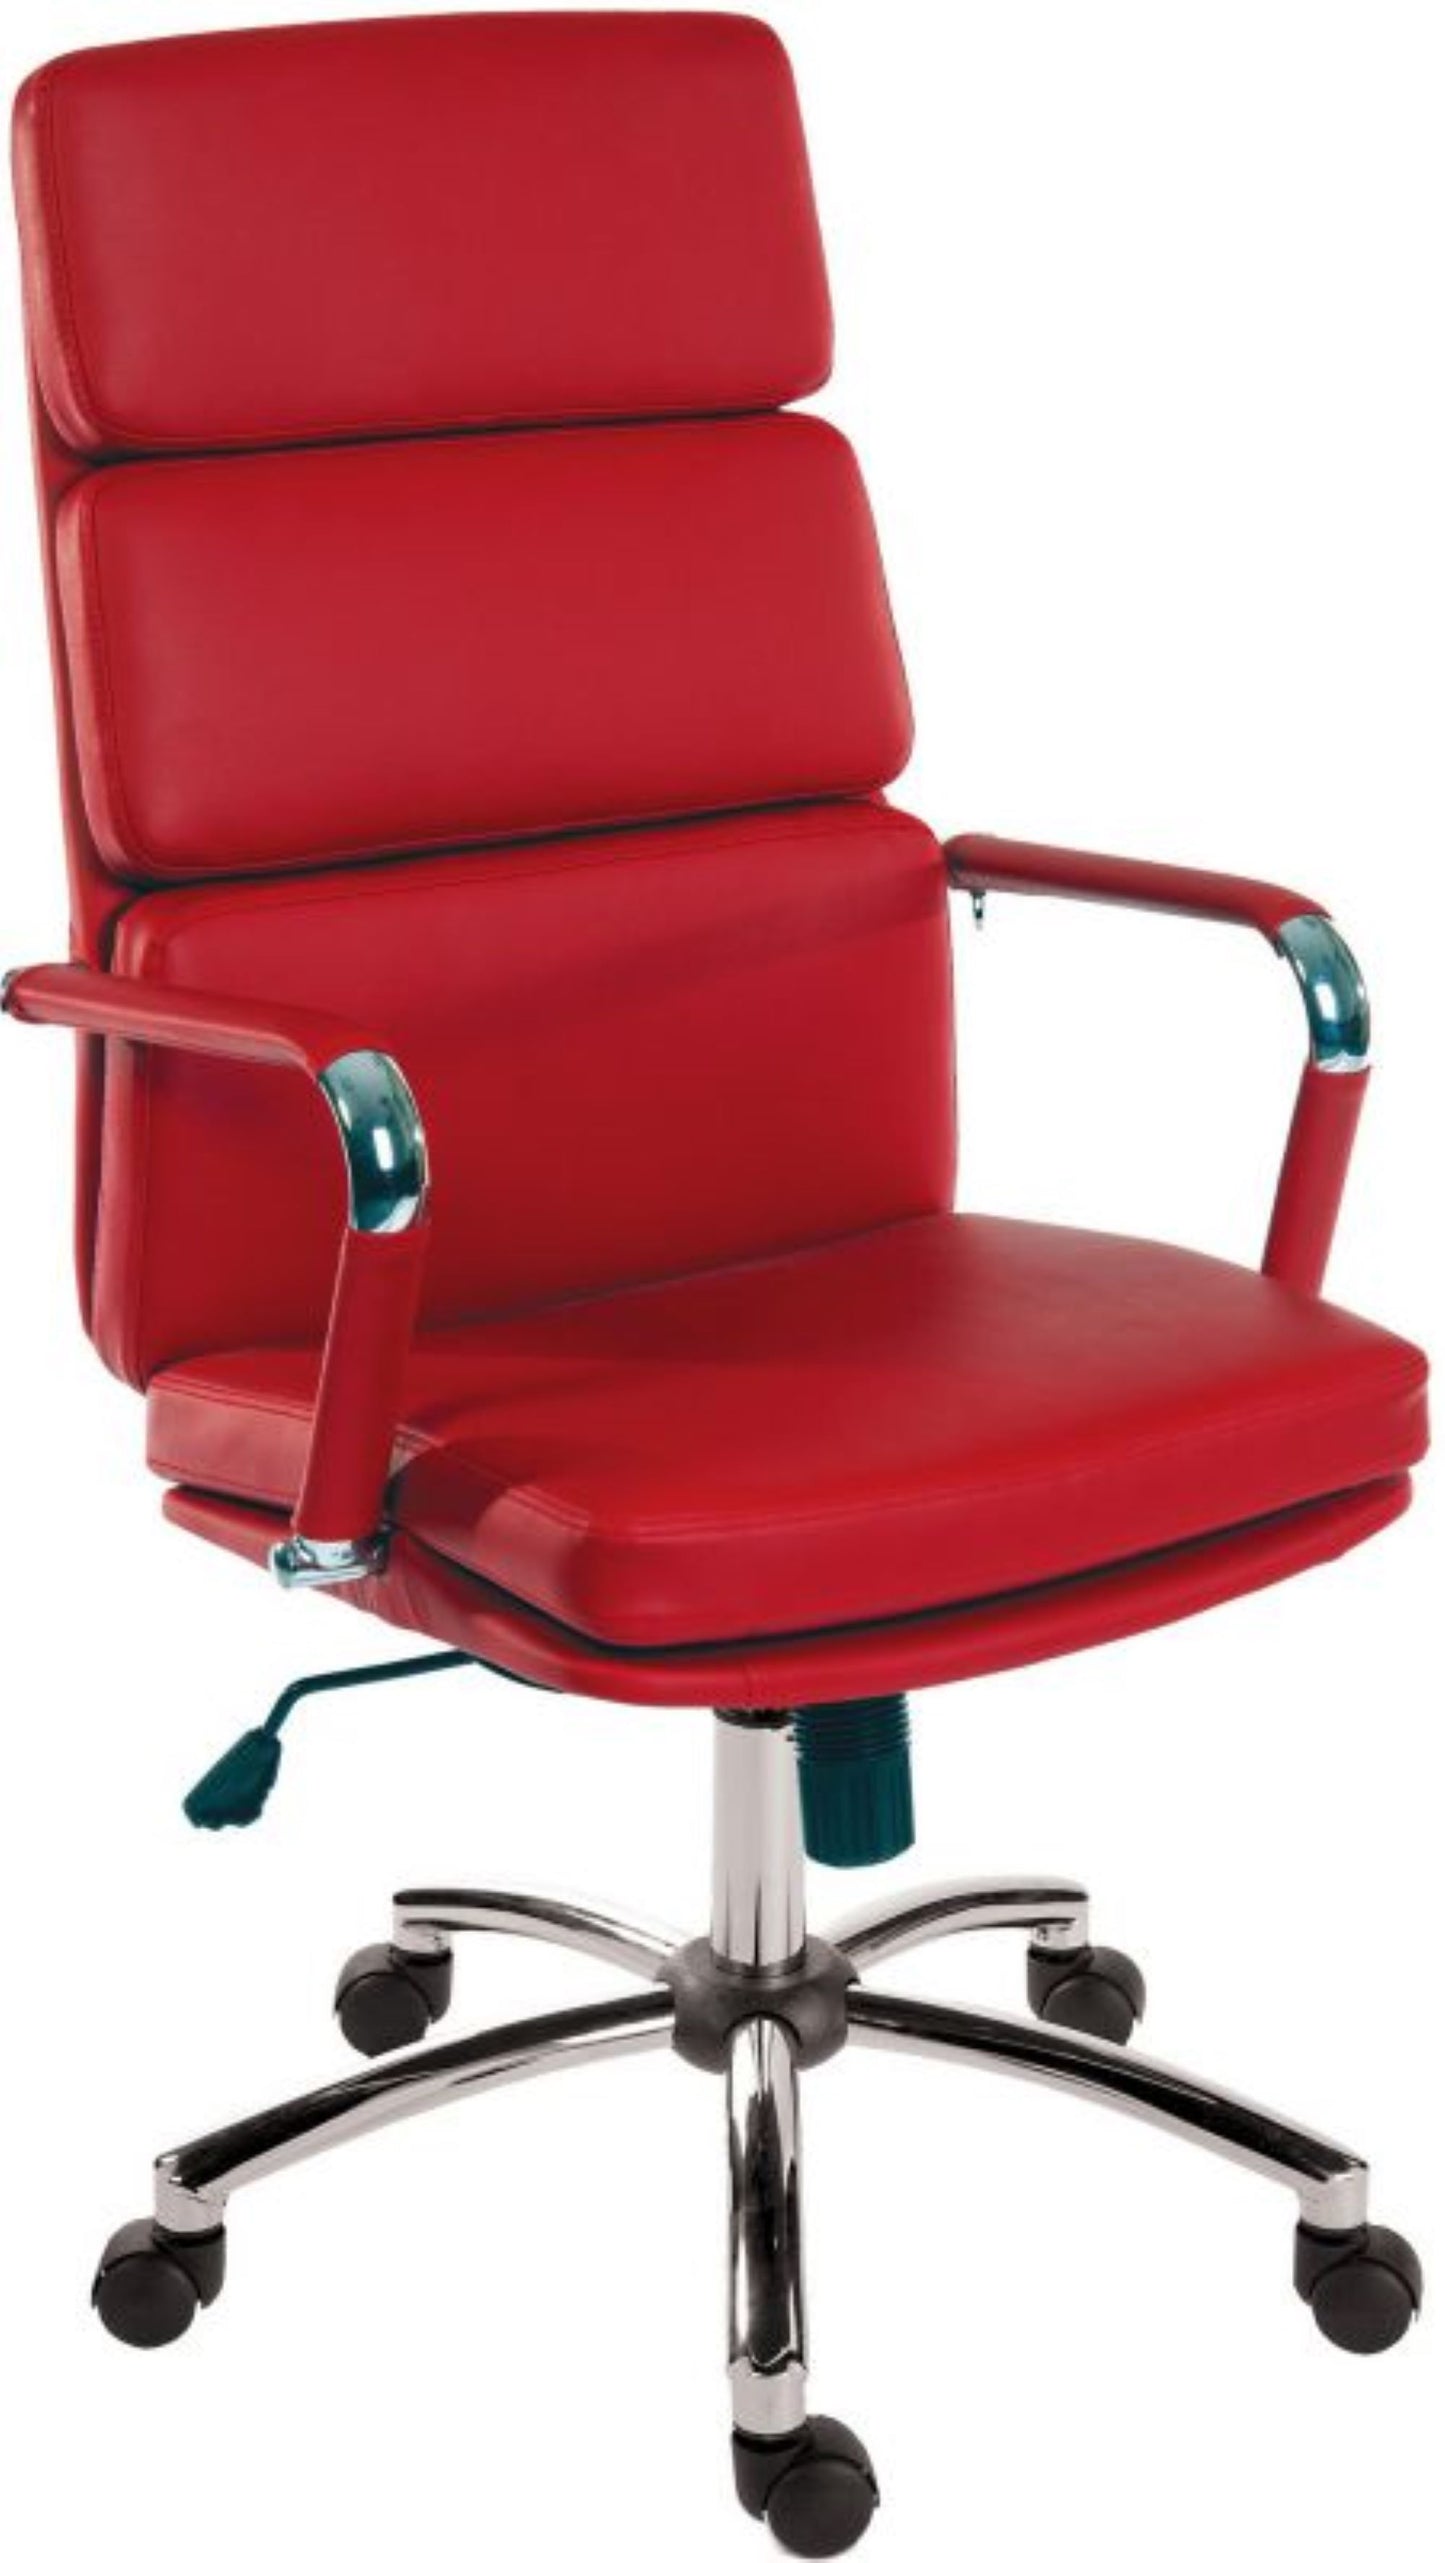 Retro style executive red office chair